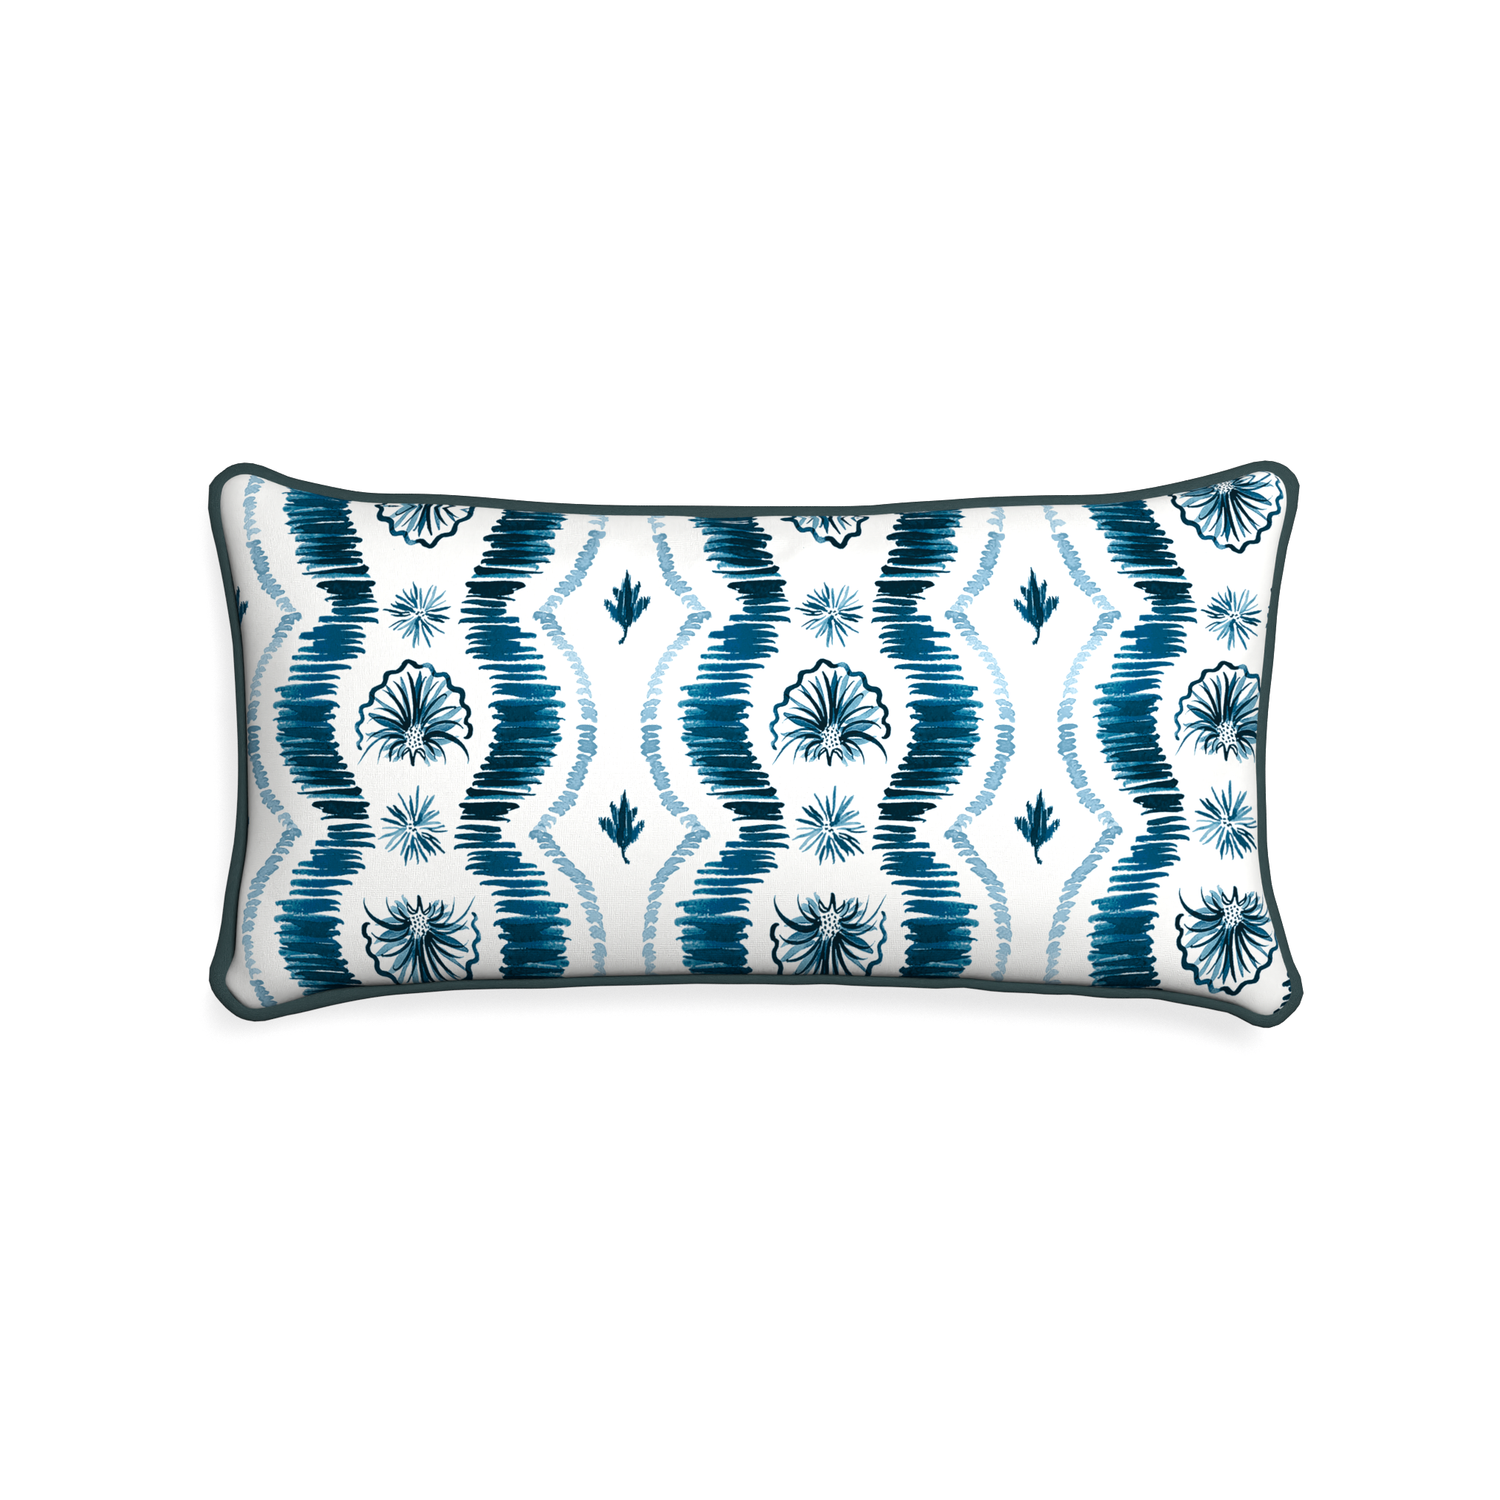 Midi-lumbar alice custom blue ikatpillow with p piping on white background